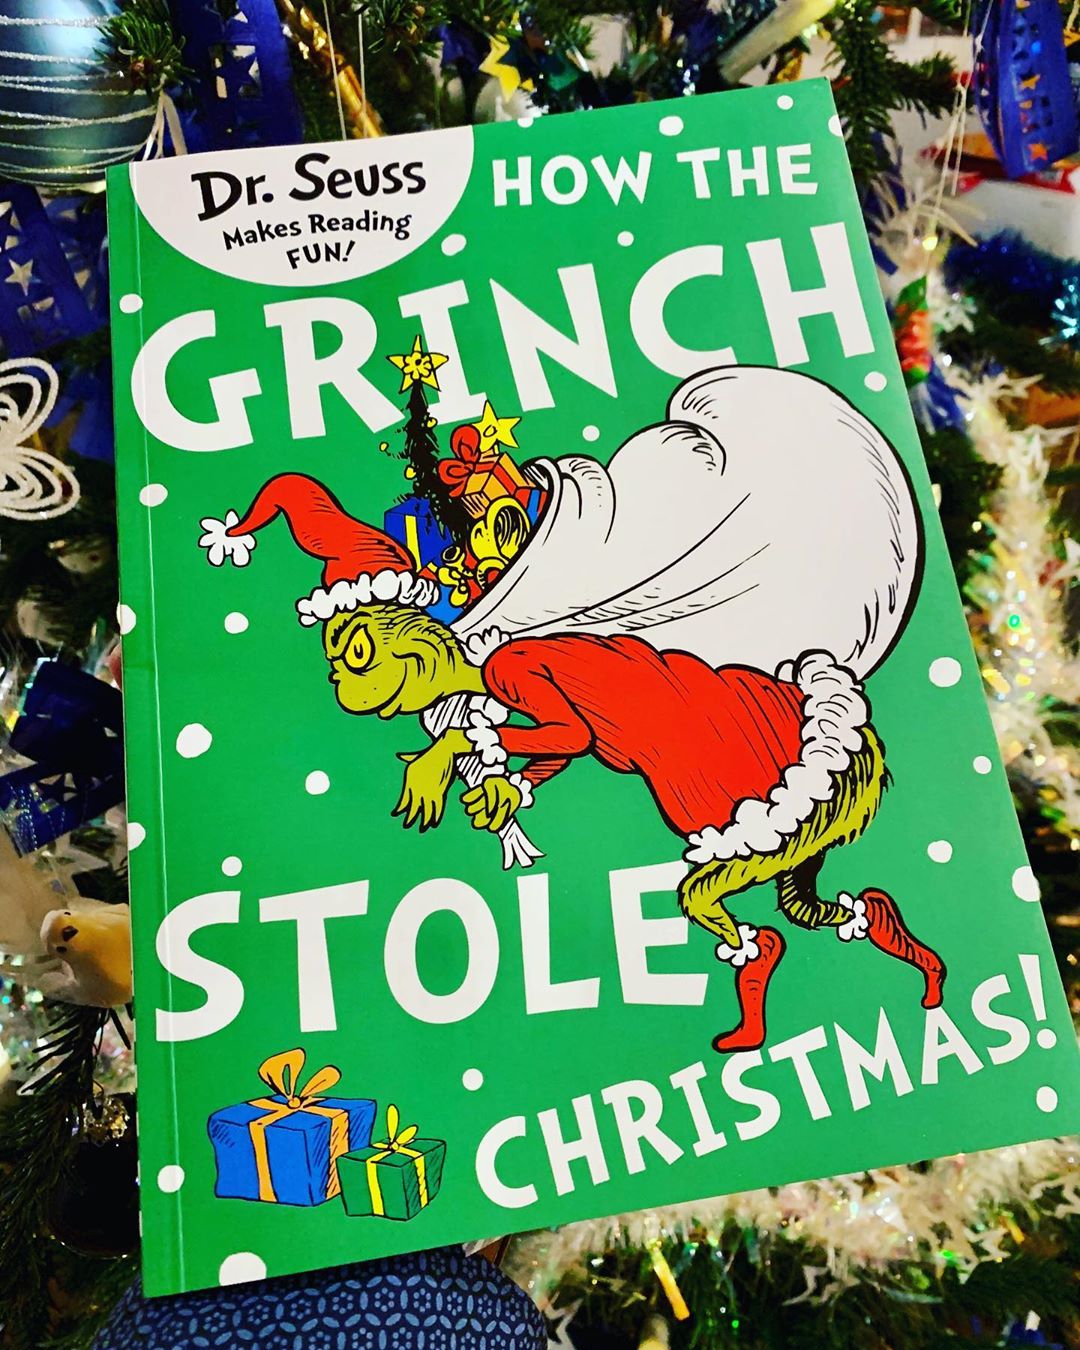 Nothing for the Kids… it‘s mine 😍 #thegrinch #drsuess #christmas